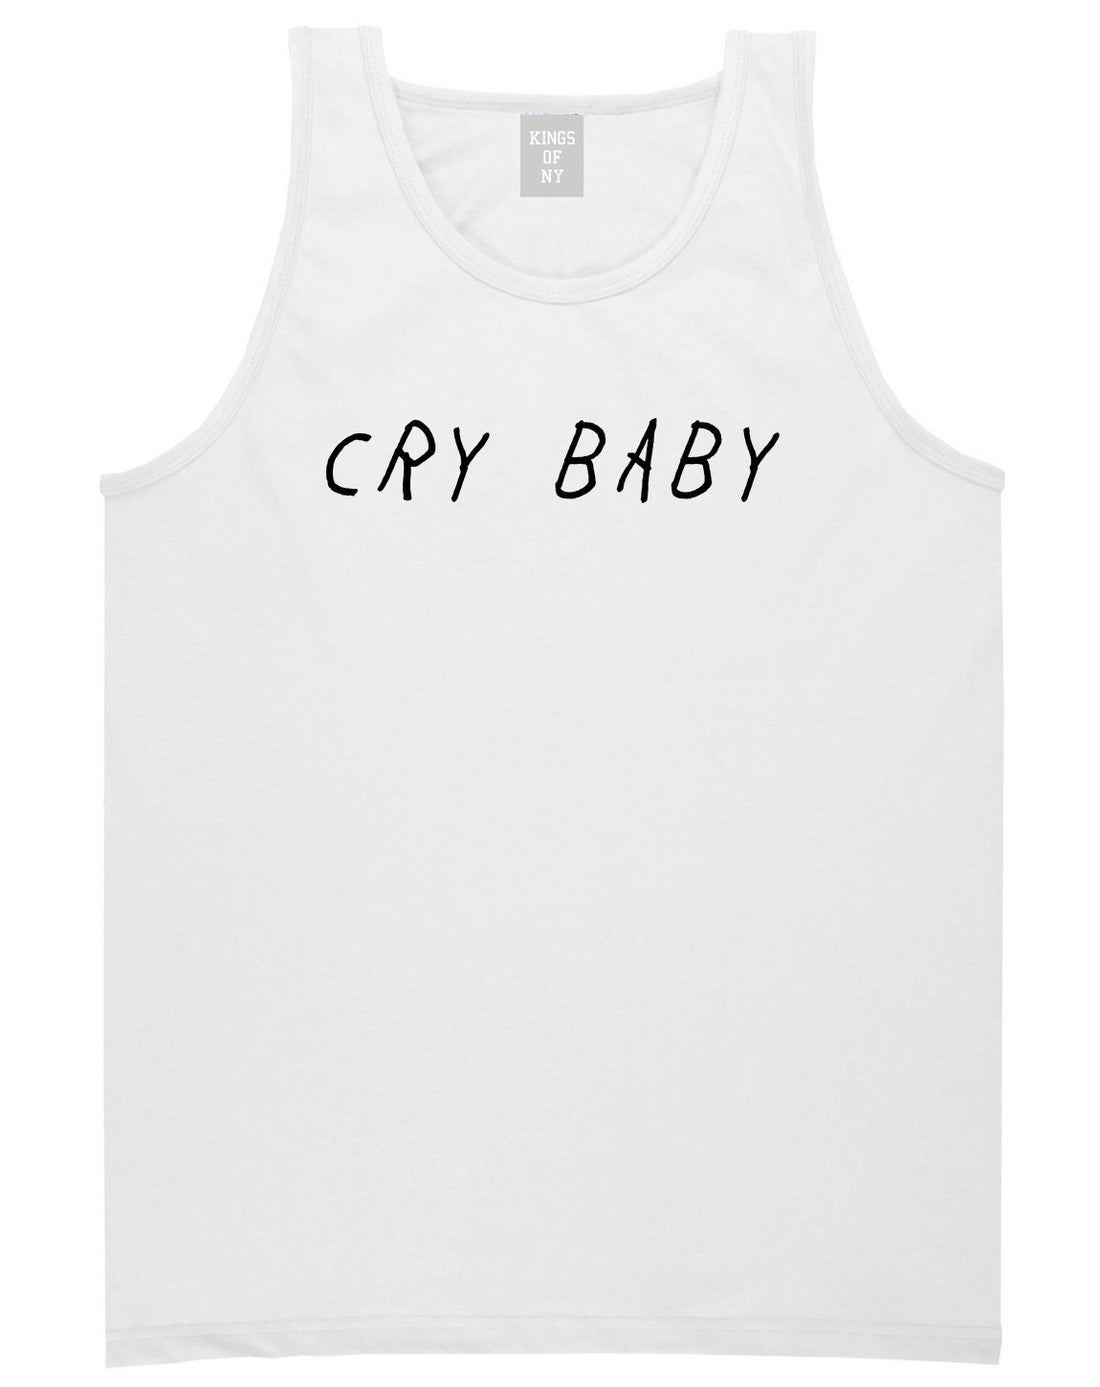 Cry_Baby Mens White Tank Top Shirt by Kings Of NY